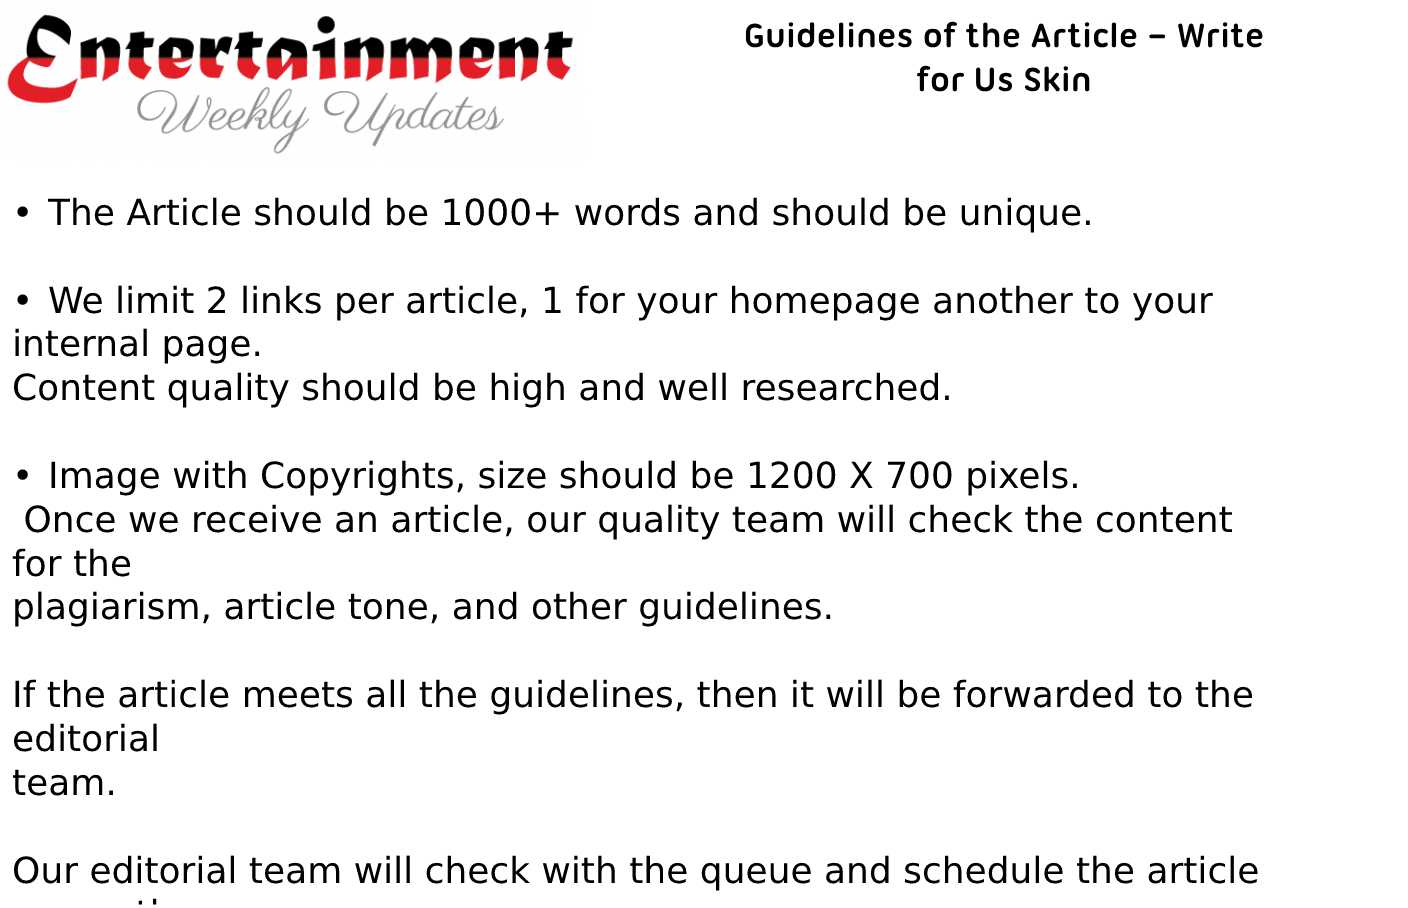 Guidelines of the Article – Write for Us Skin